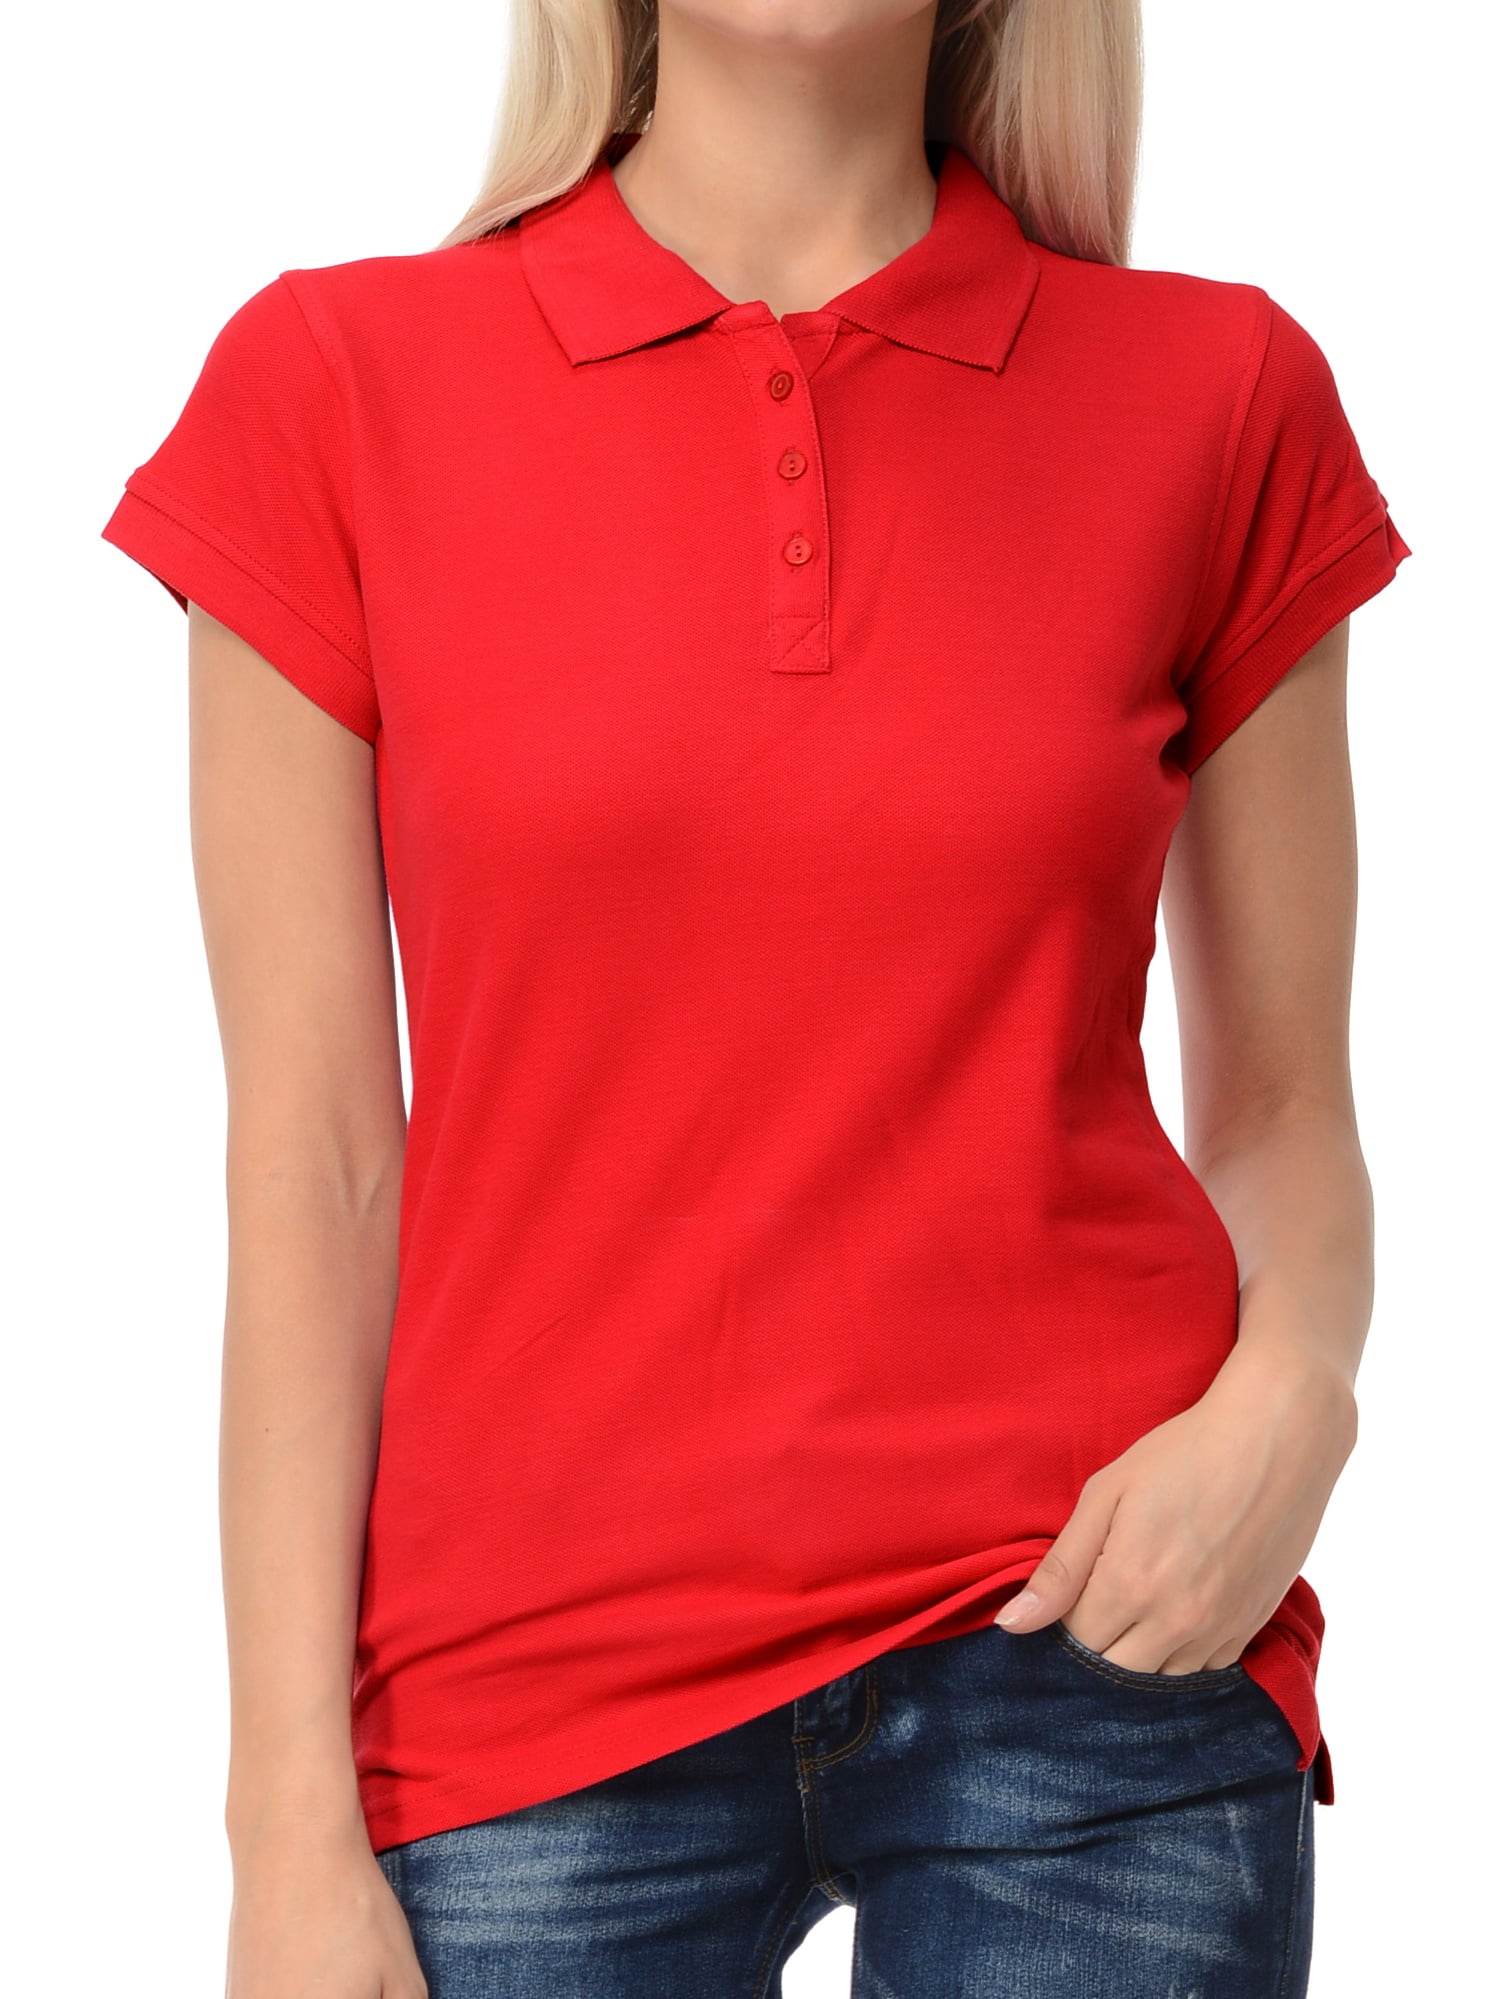 Basico - Basico Red Polo Collared Shirts For Women 100% Cotton Short ...